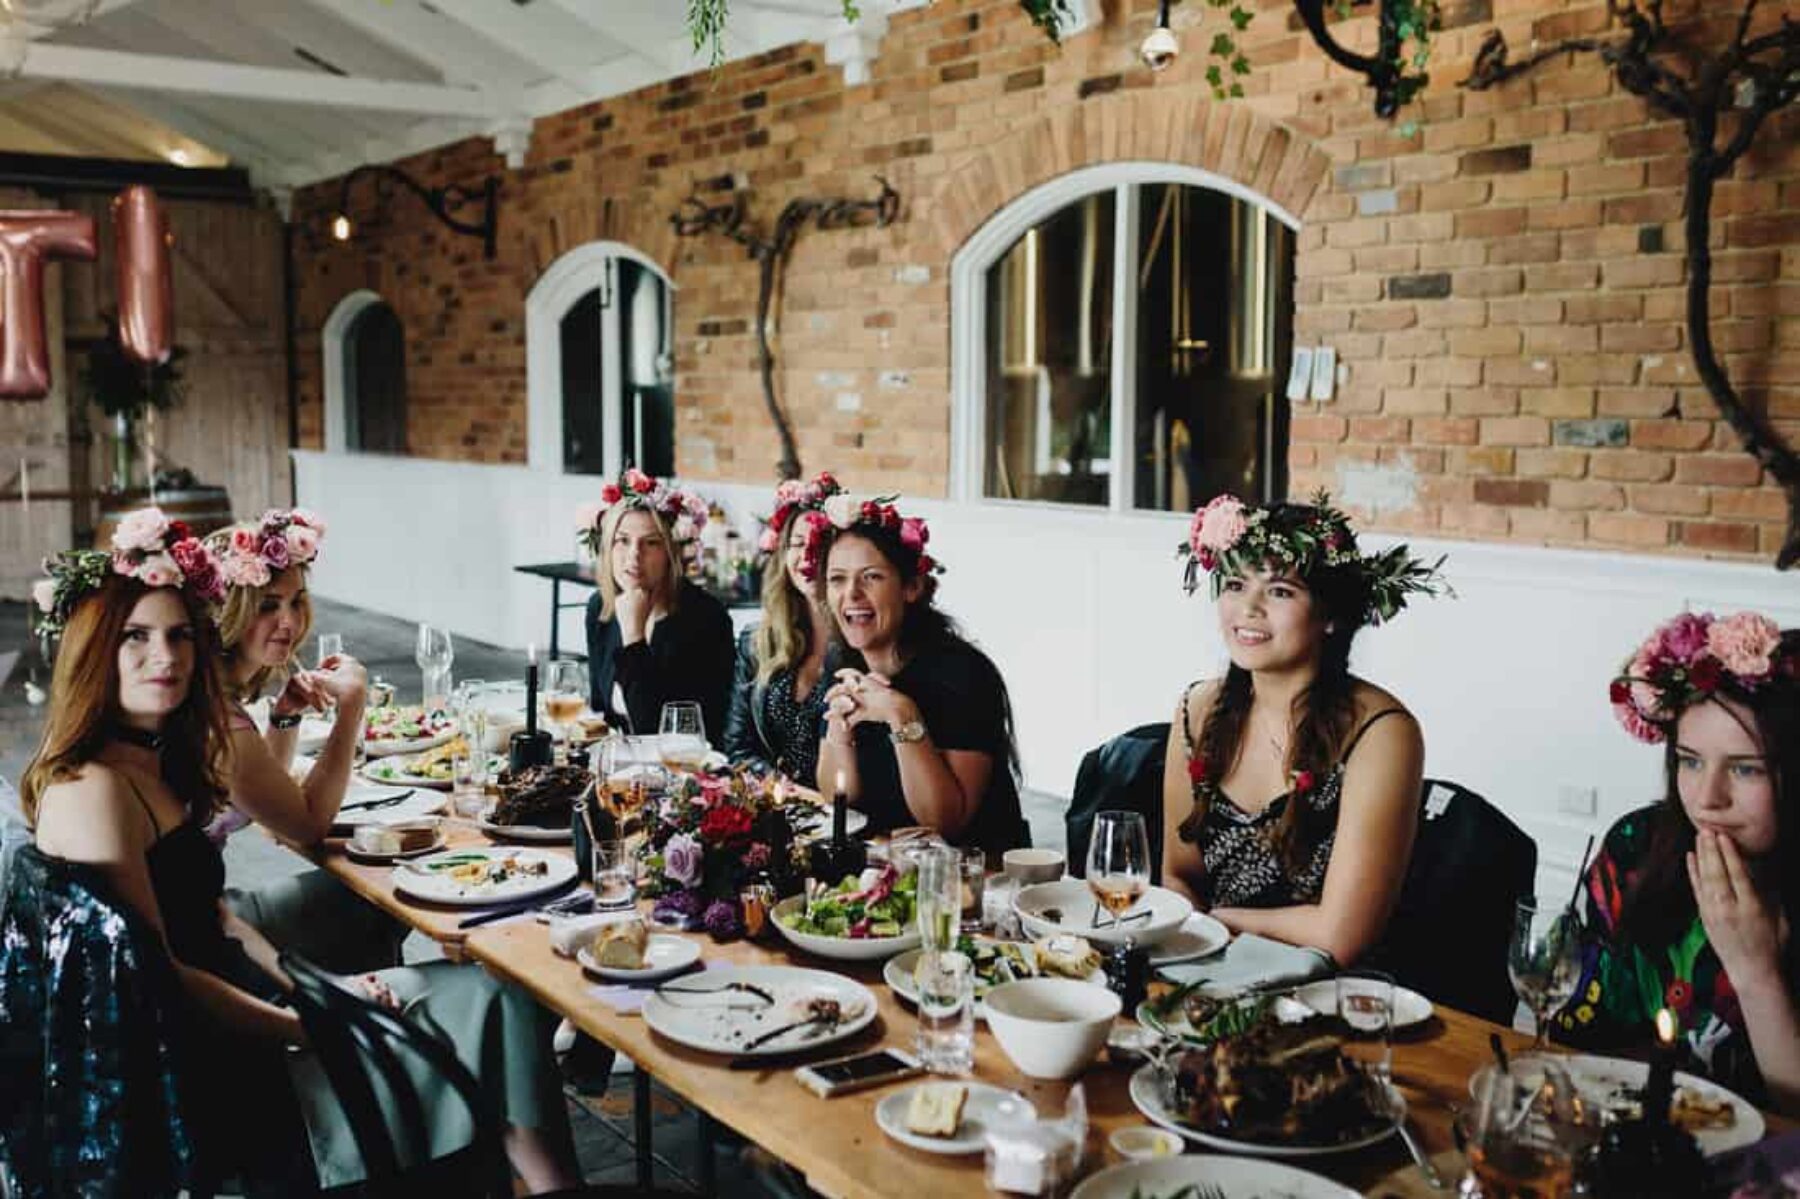 Stylish foodie hen's day in the Yarra Valley